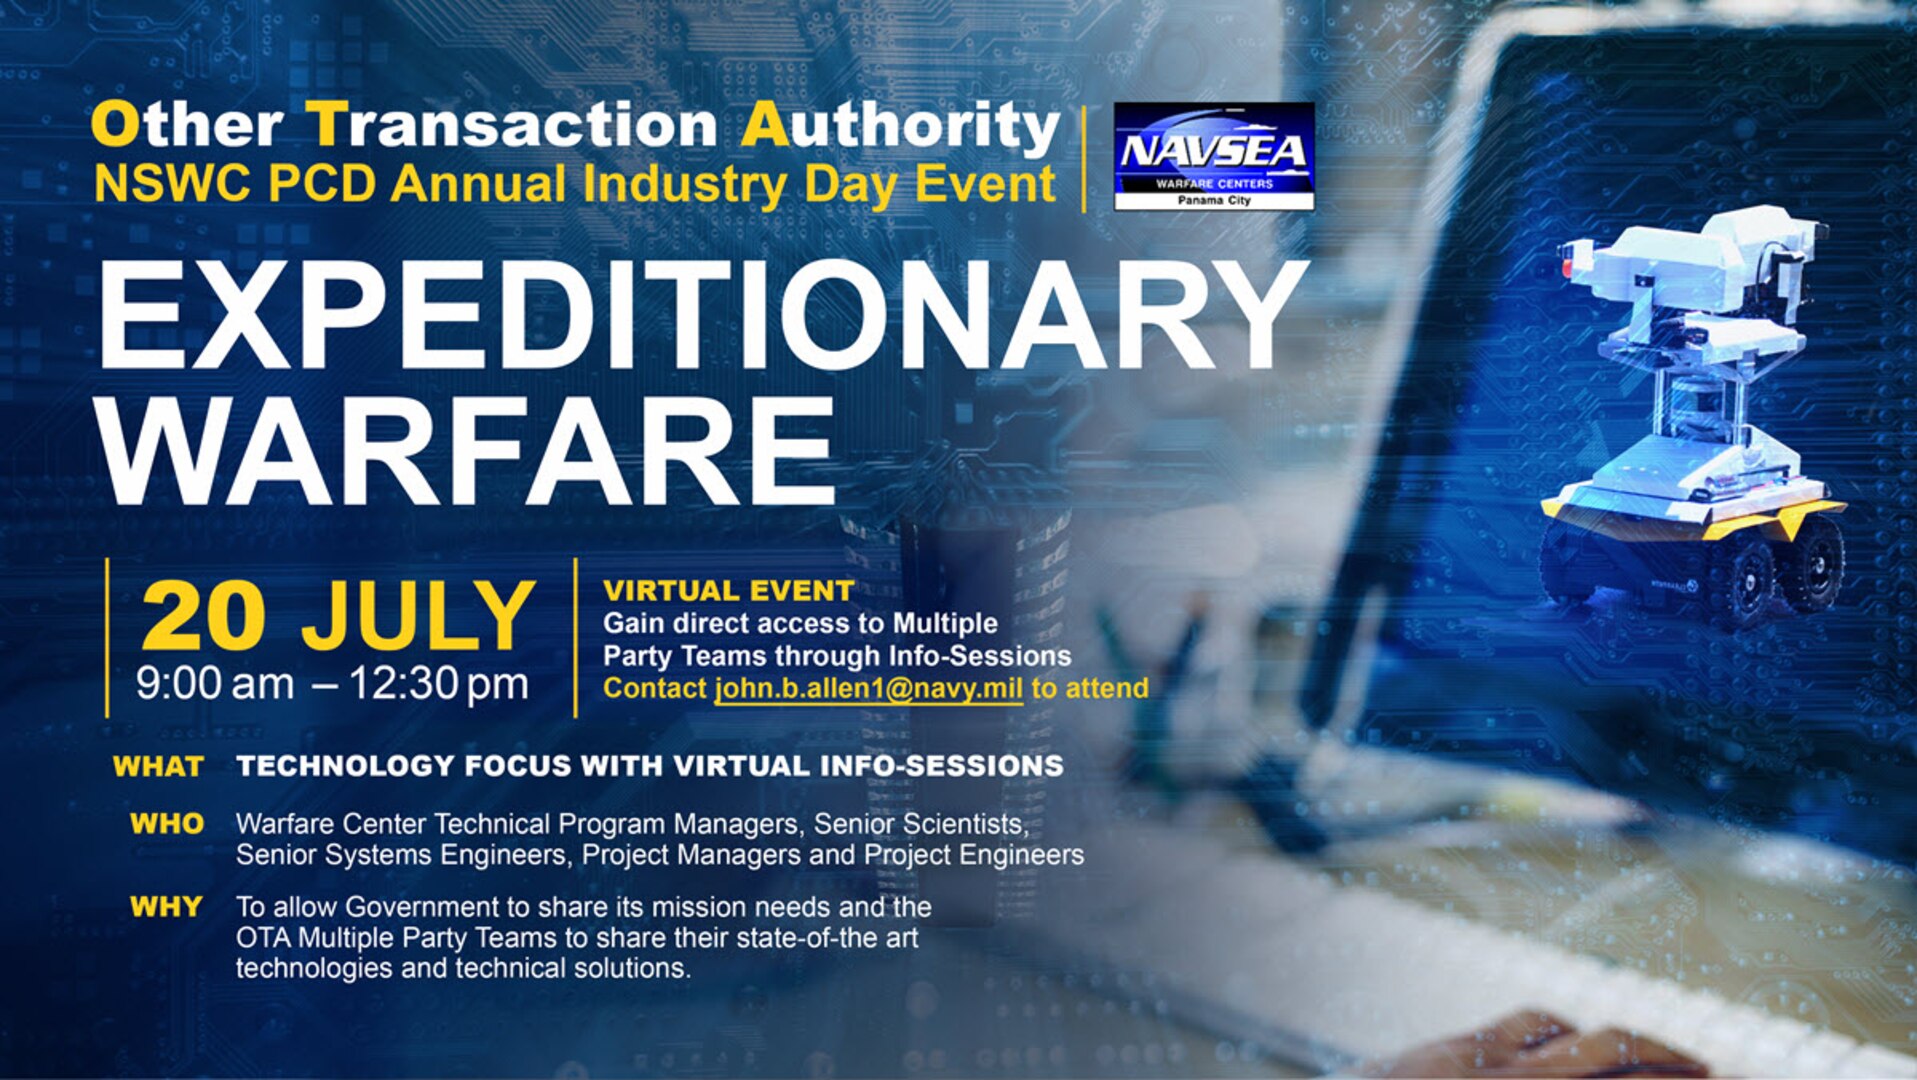 The Naval Surface Warfare Center Panama City Division (NSWC PCD) held their annual Other Transaction Authority (OTA) Industry Day event for expeditionary warfare virtually on July 20.